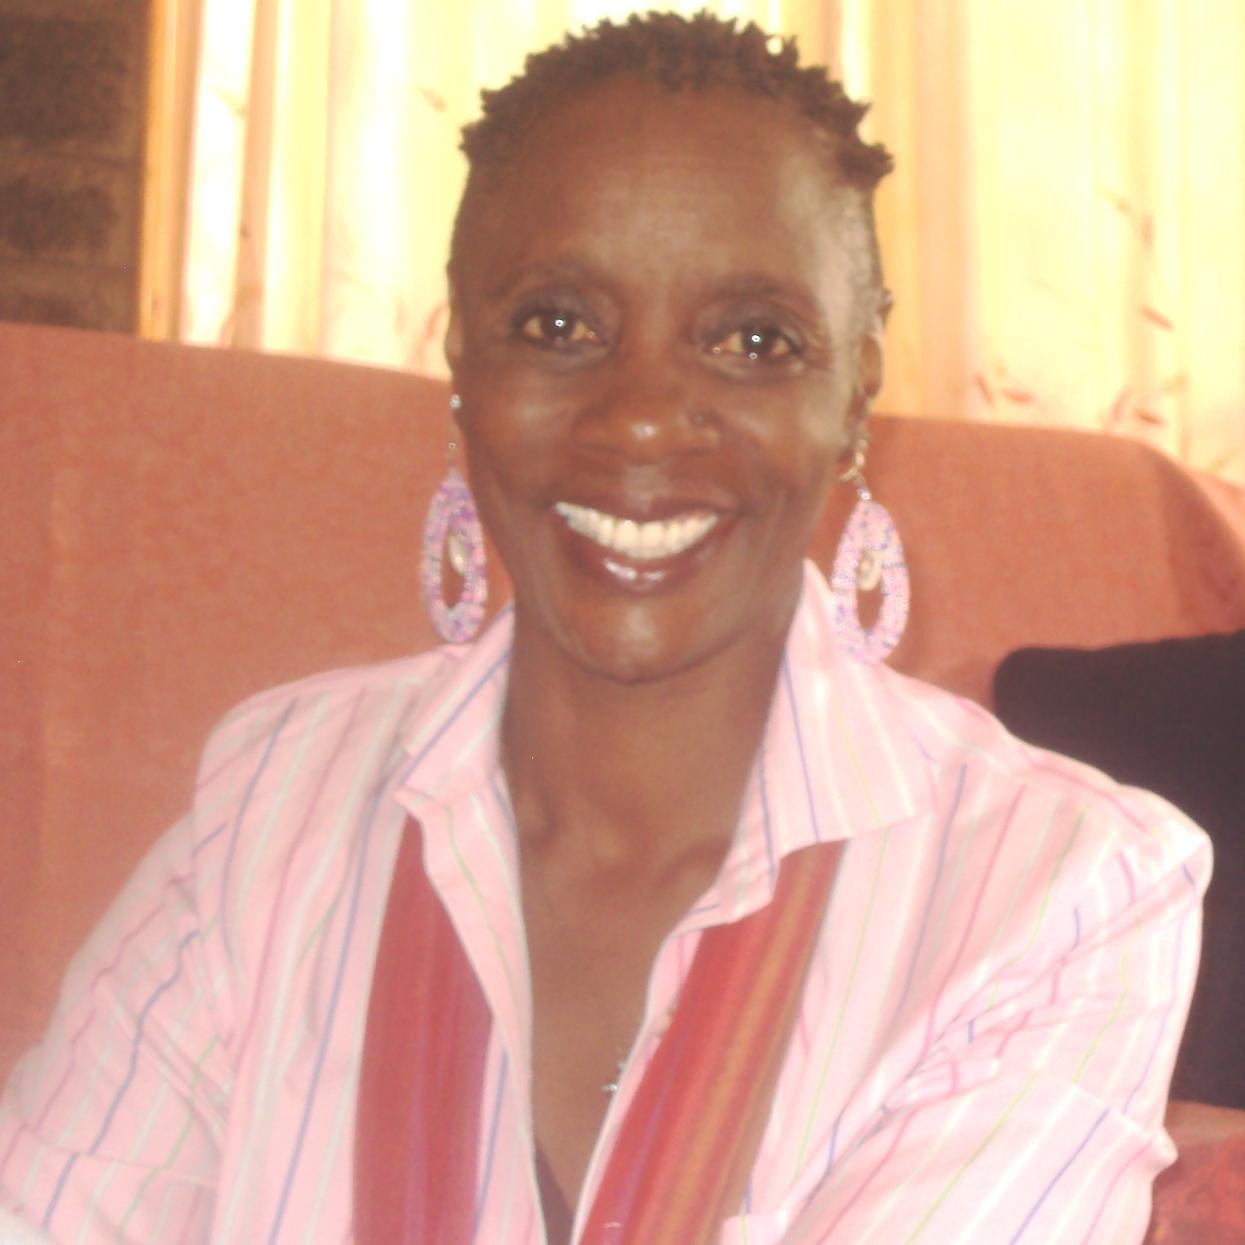 Qualified International Clinical Psychotherapist with 20 plus years of work experience. Founder of first Re-entry NGOs in Kenya for ex-incarcerated women.